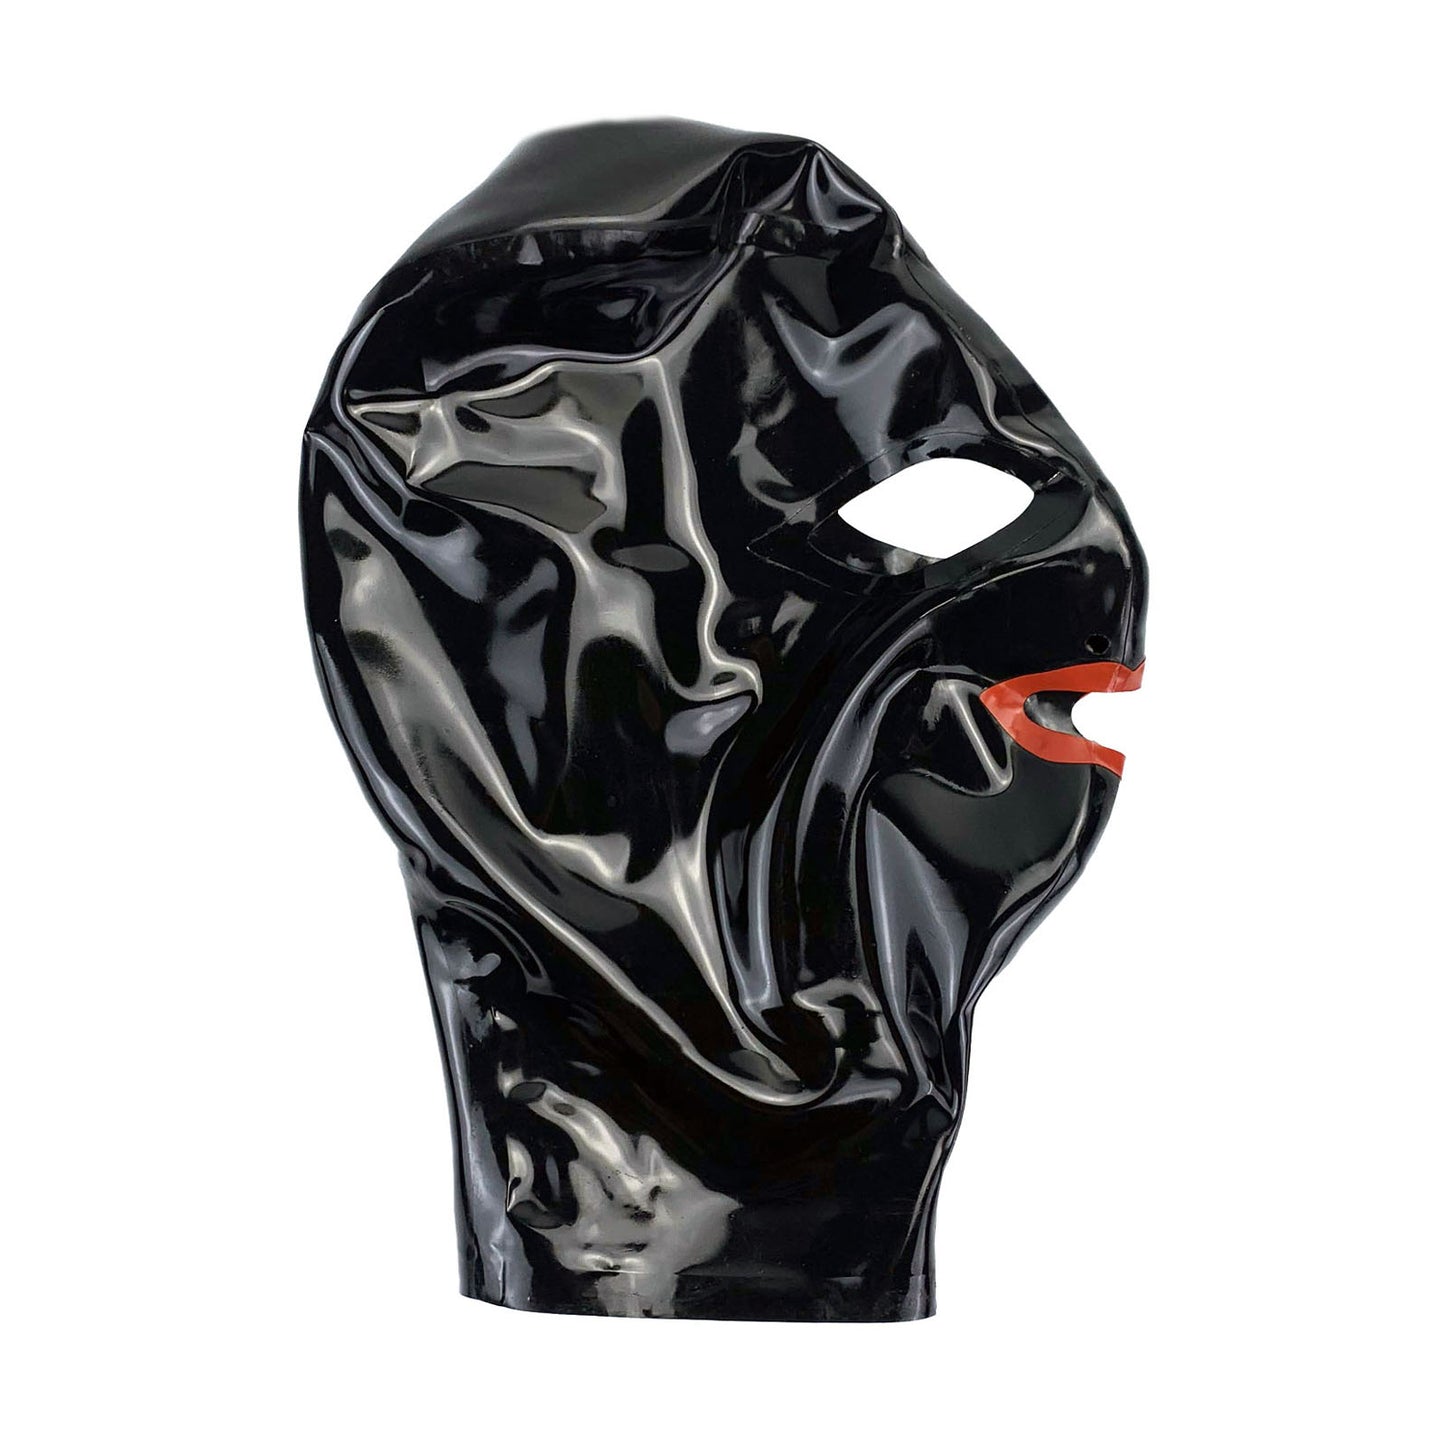 MONNIK Latex Hood Rubber Handmade Mask with Open Eyes and Mouth Red Edge for Party Clubwear Catsuit Cosplay